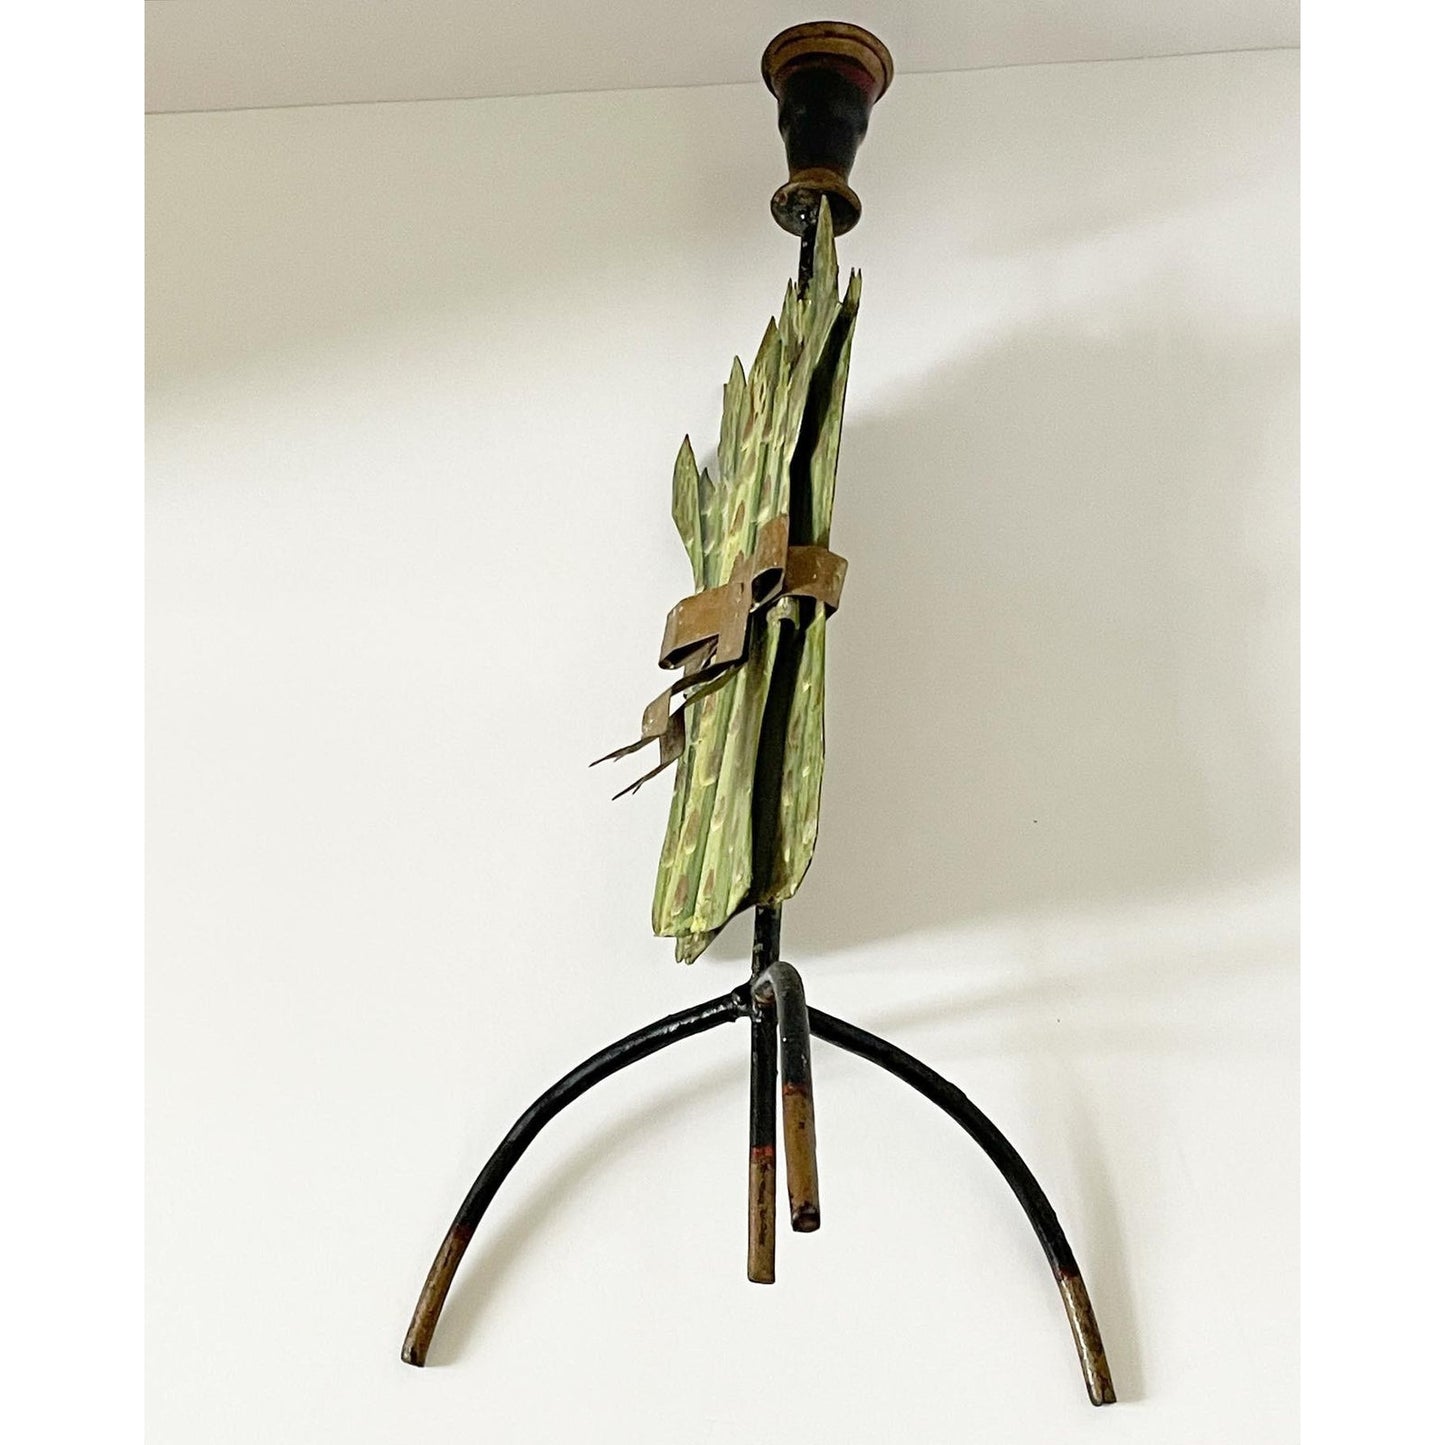 Early 20th Century Handpainted Toleware Candle Stick Holder With Asparagus